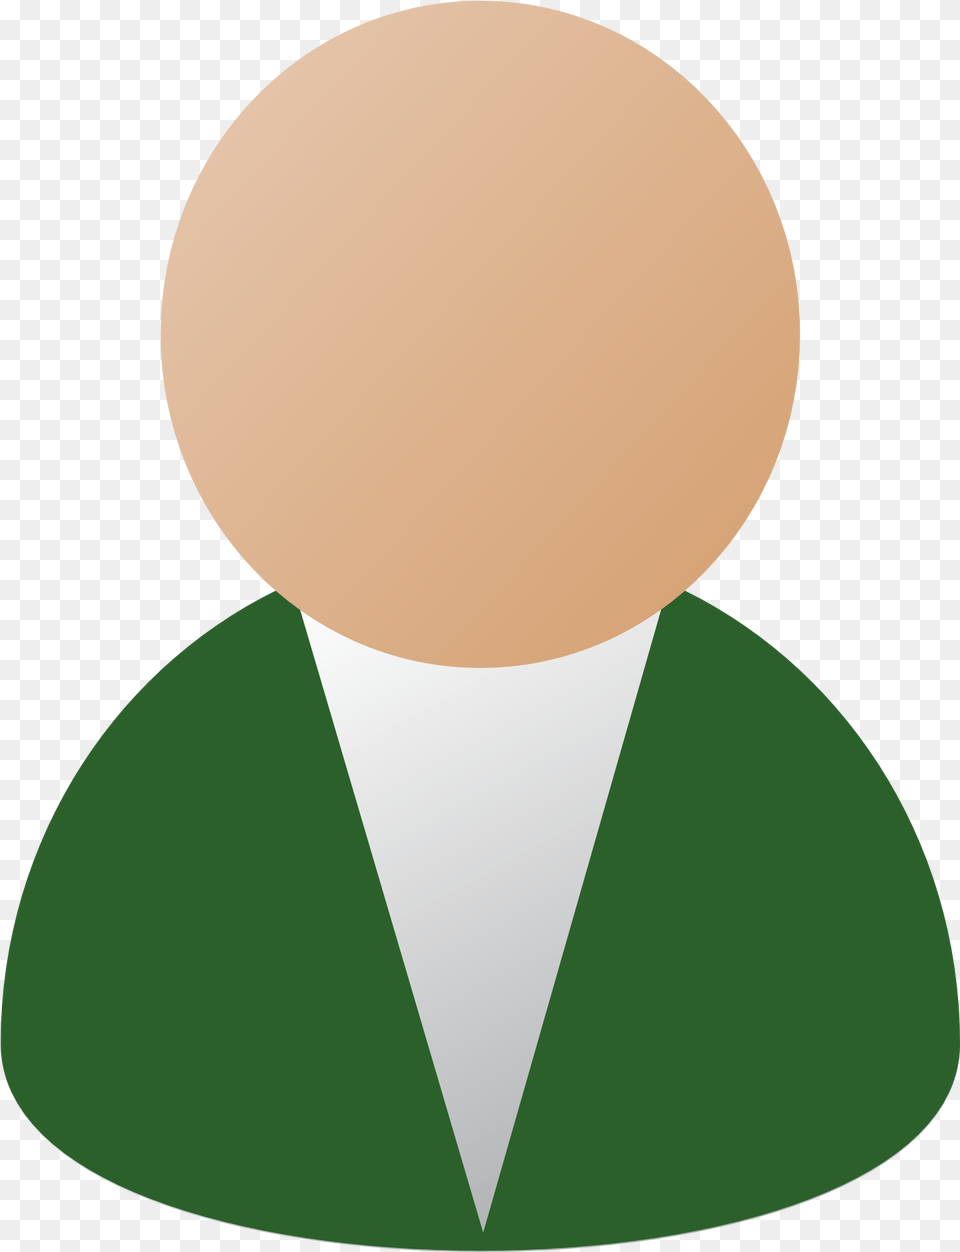 Person Icon Drawing Free Image Download Vector Person Green, Sphere, Astronomy, Moon, Nature Png